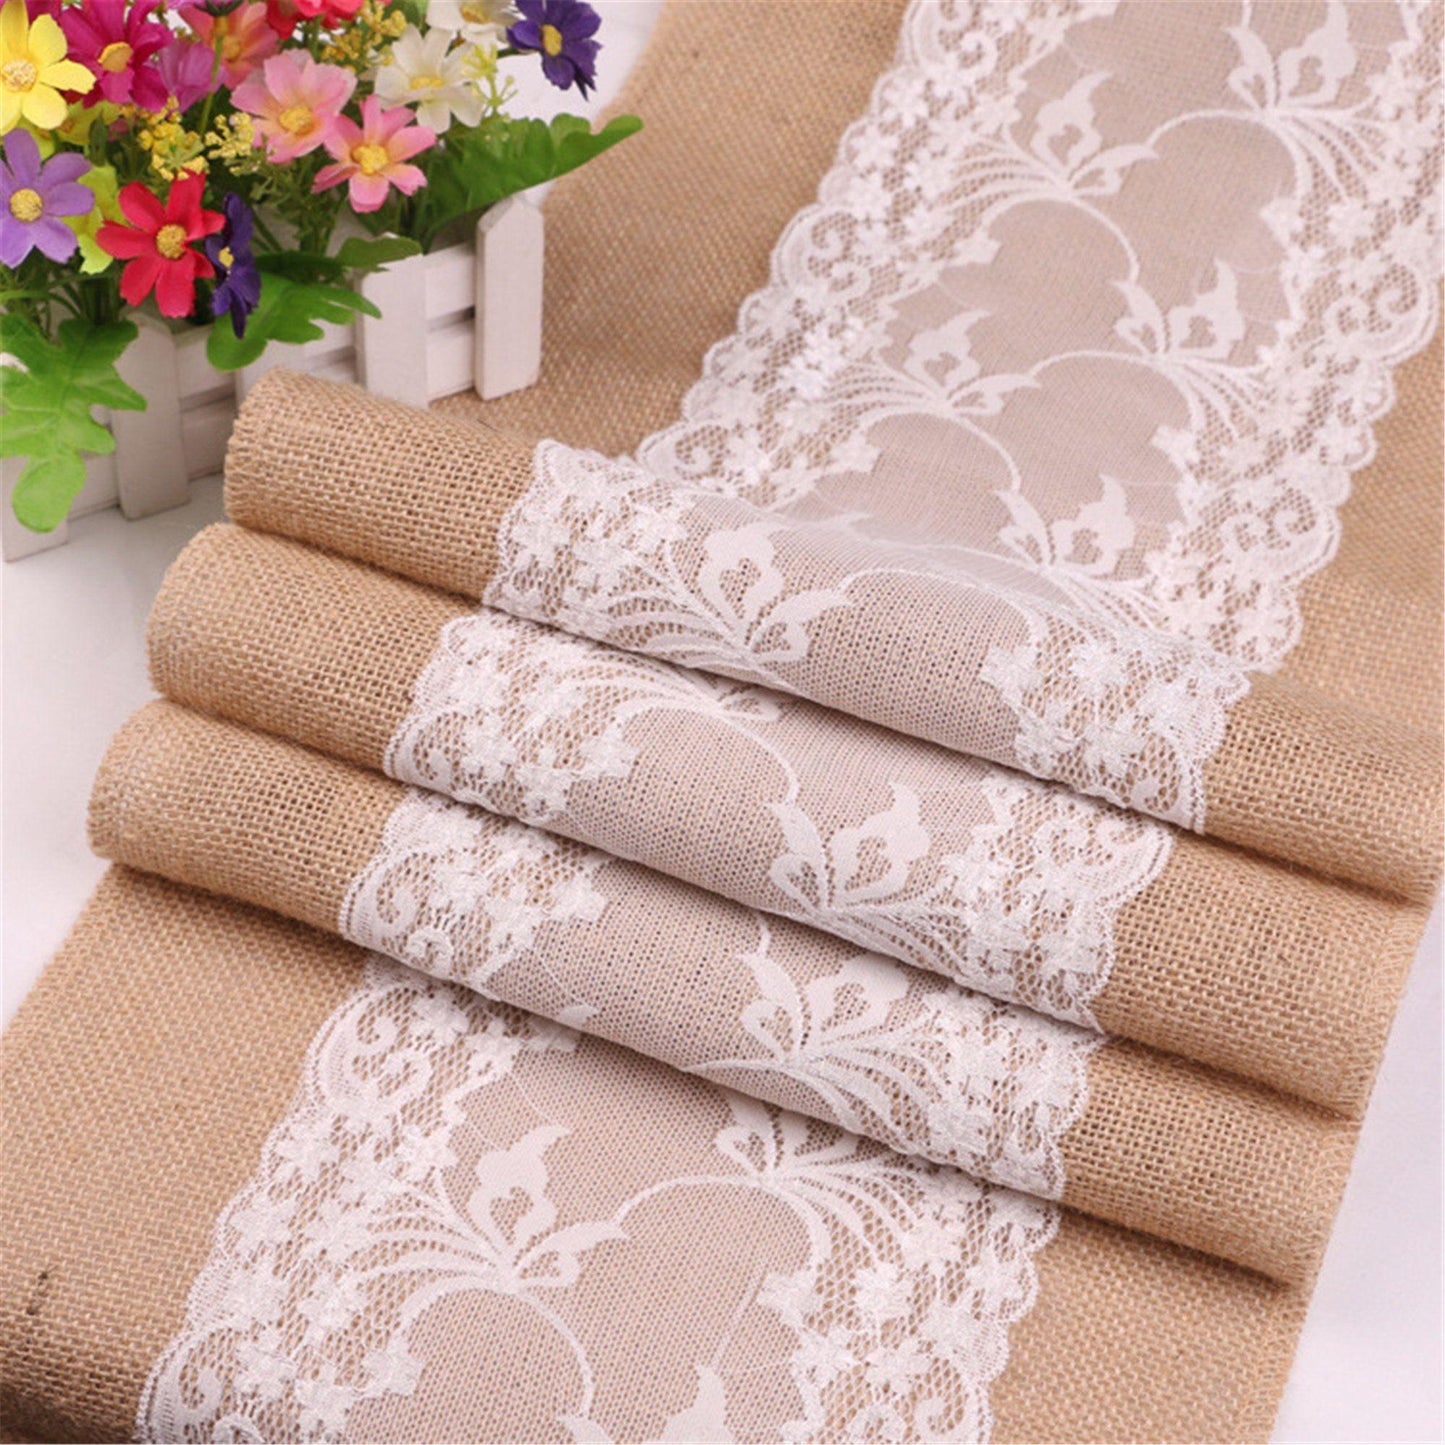 72 Inch Burlap Lace Table Runners Wedding Table Runner - Rustic Table Runner Natural Centerpieces Runners for Party Birthday Decor - If you say i do